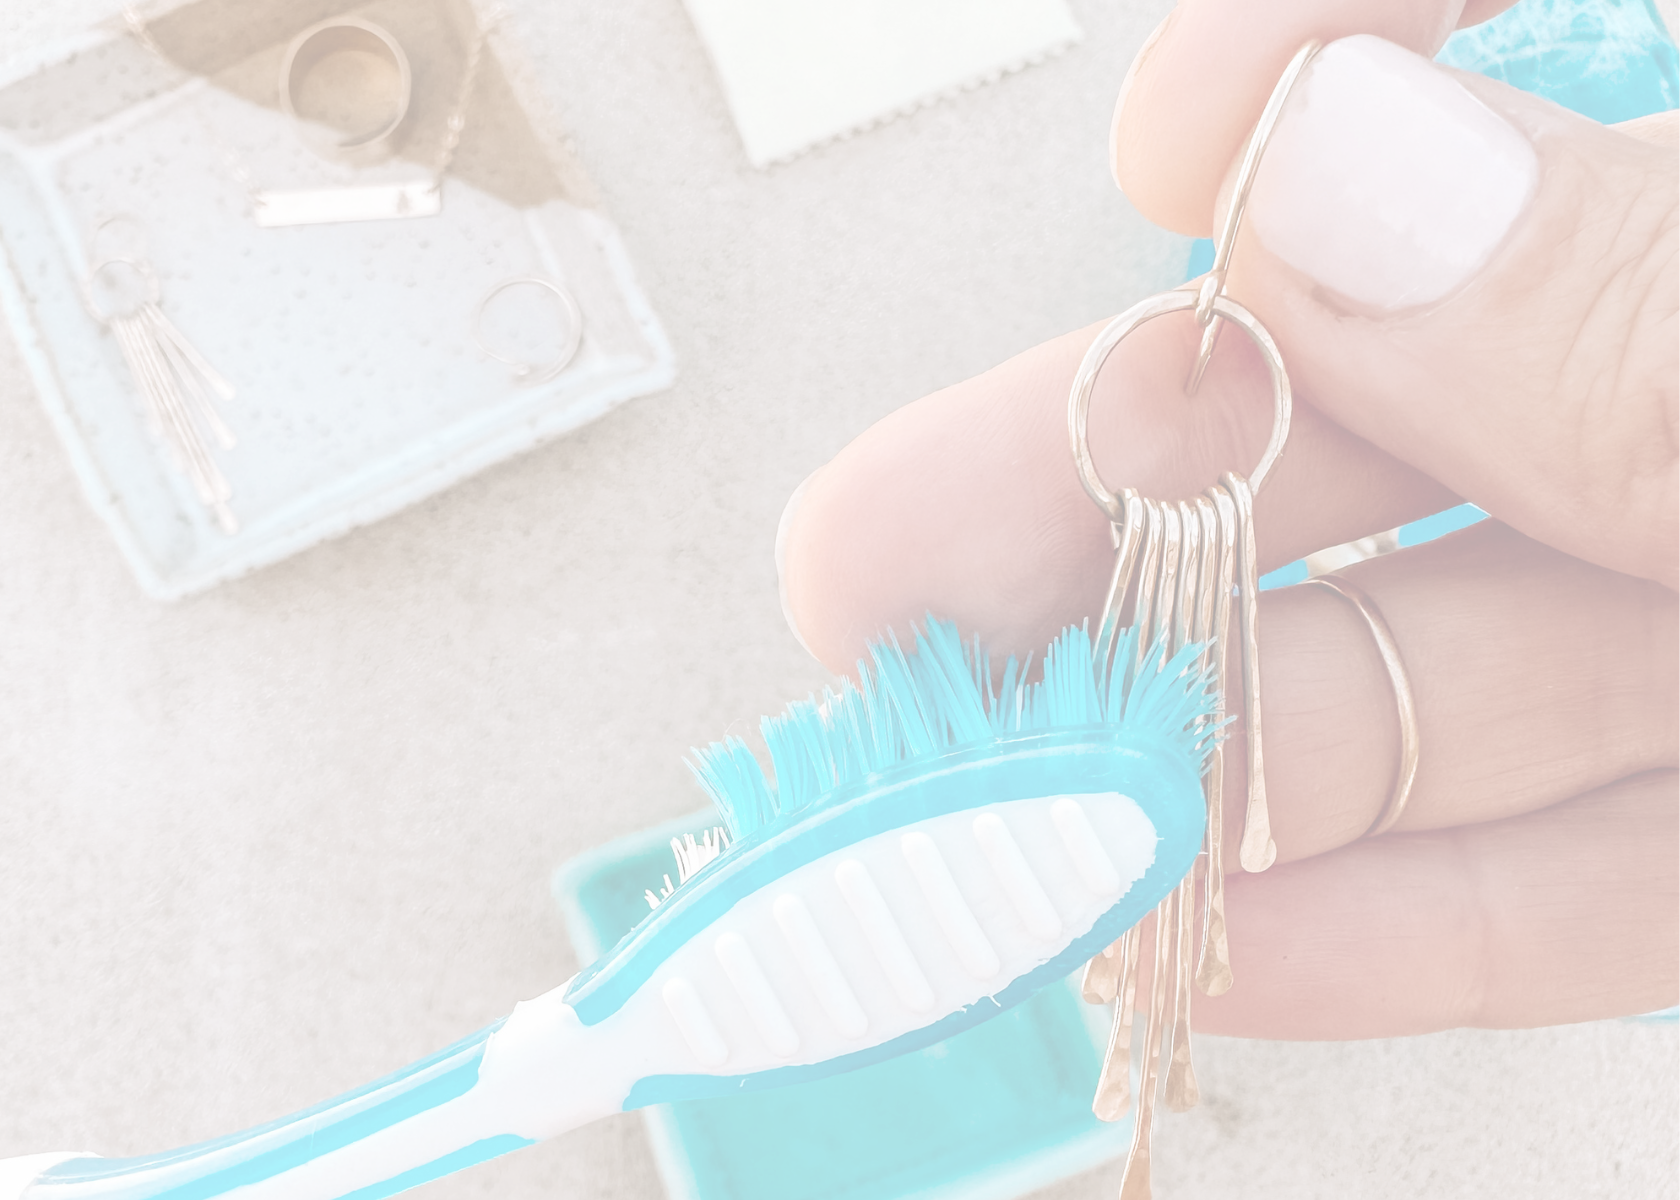 Top Tips for Cleaning Gold Filled Jewelry at Home